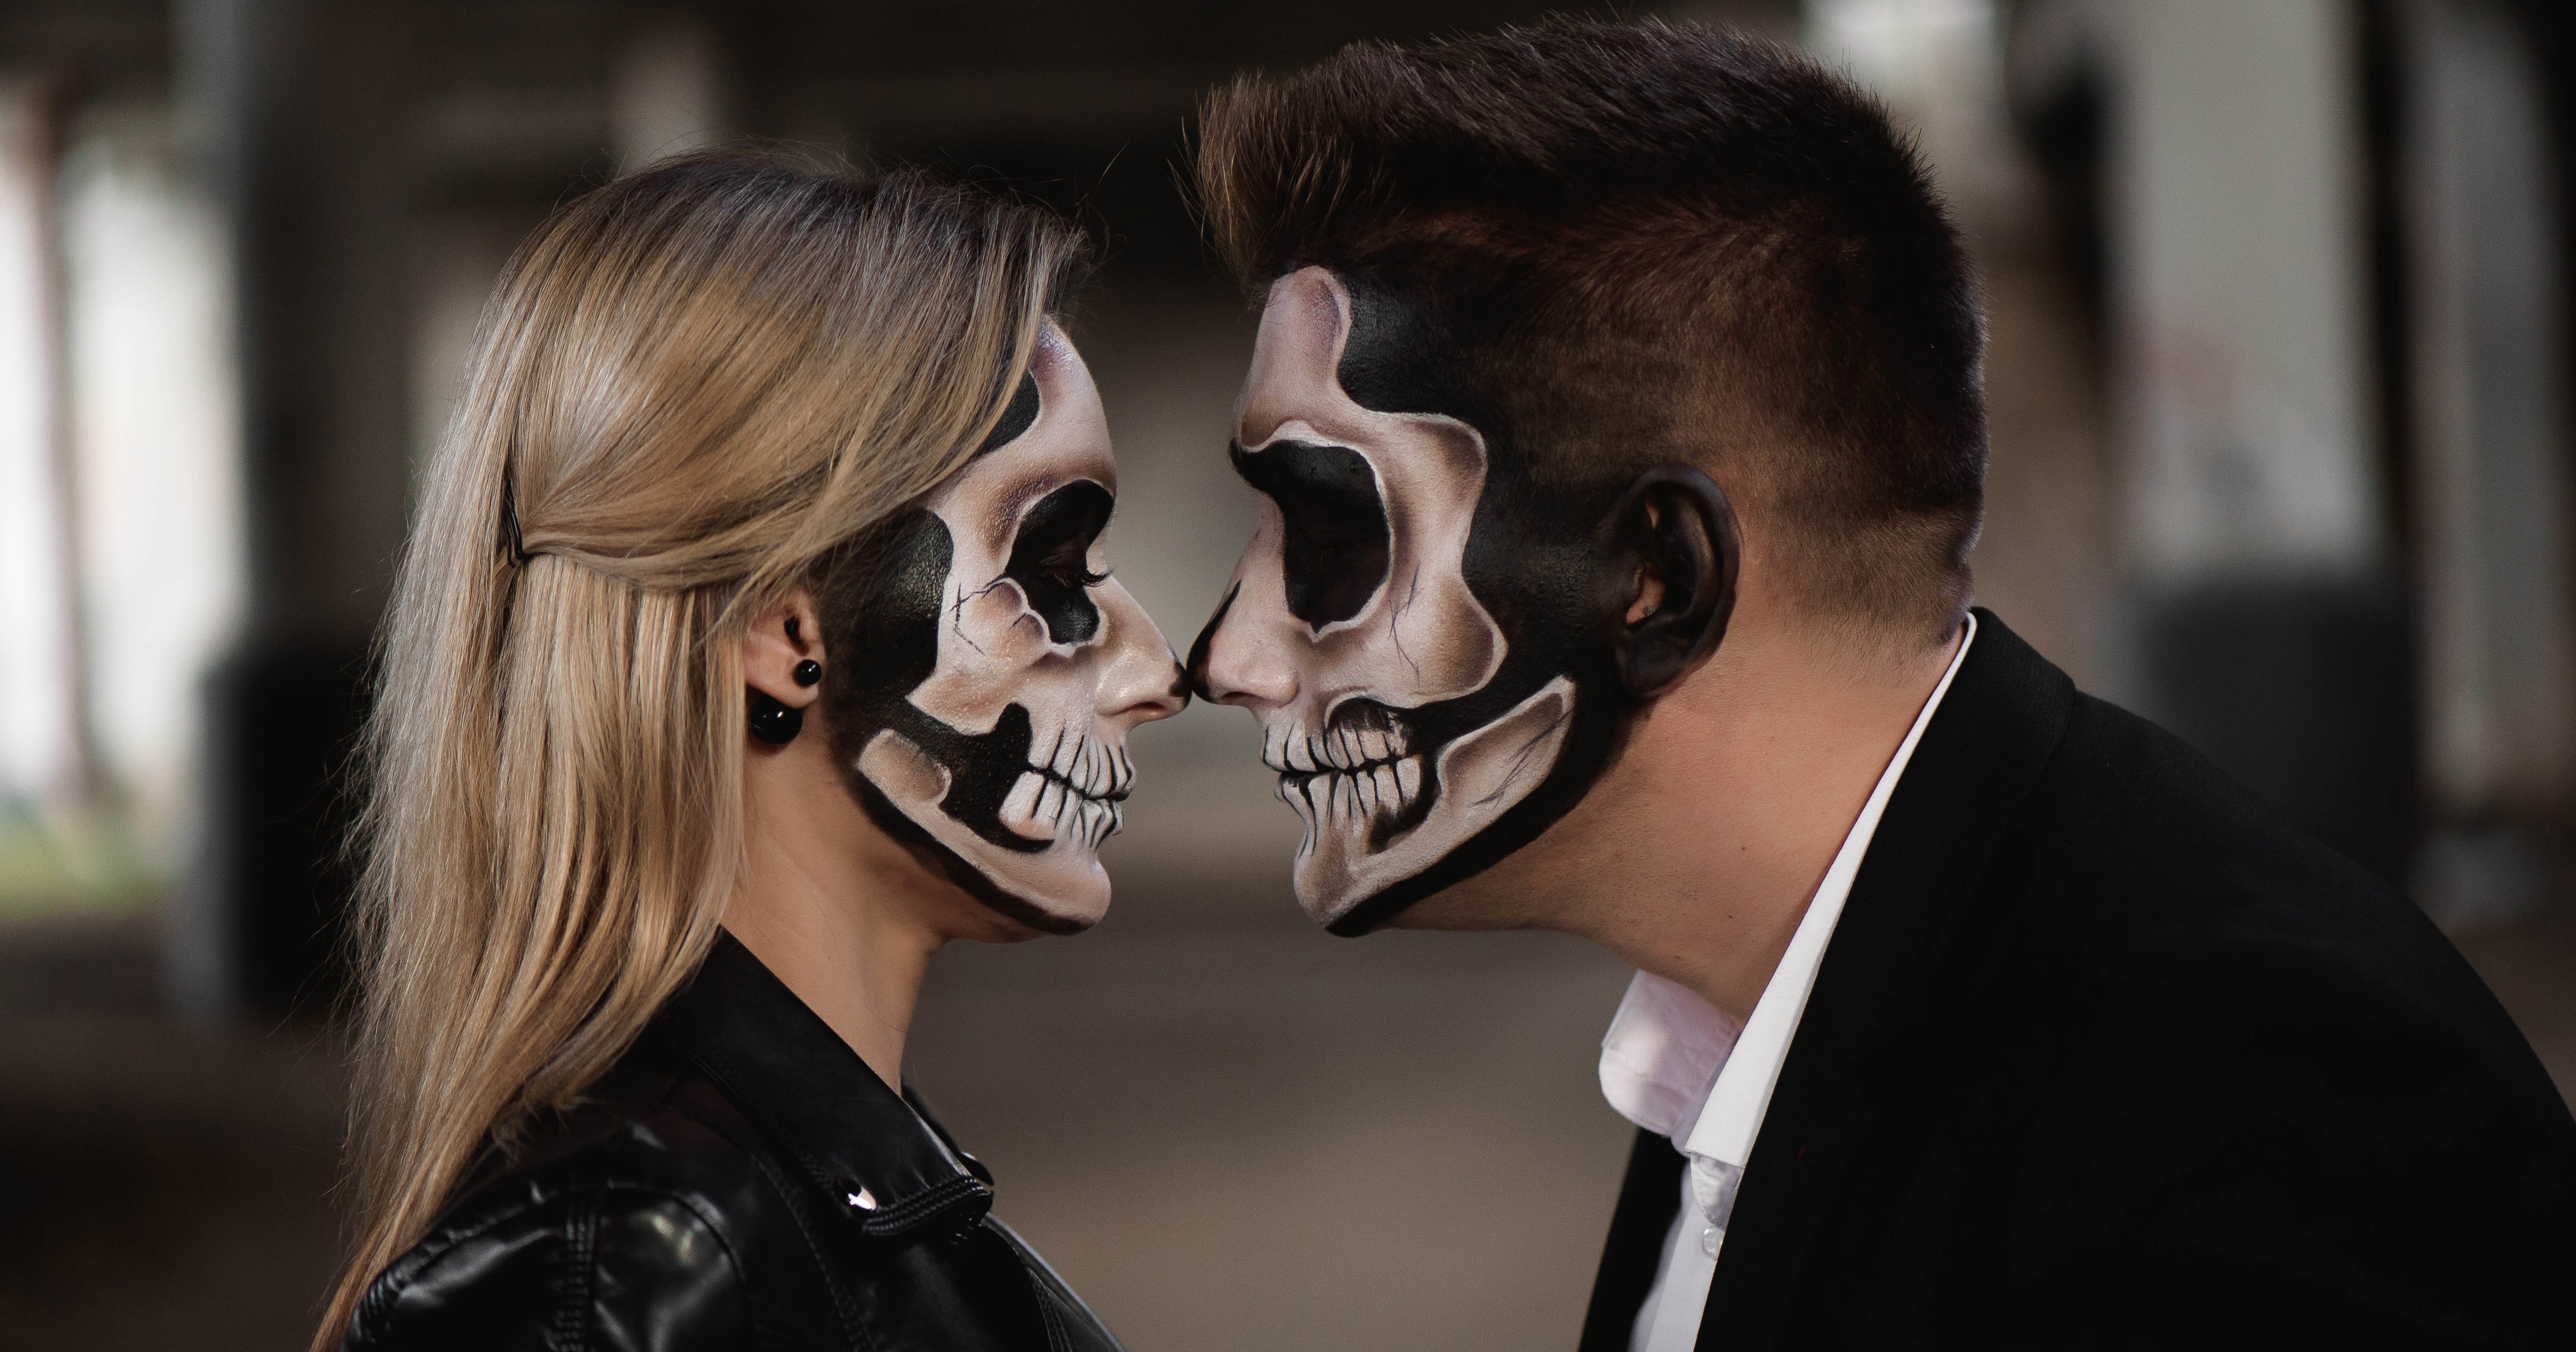 Stylish and Creative Couple Costume Ideas for Carnaval